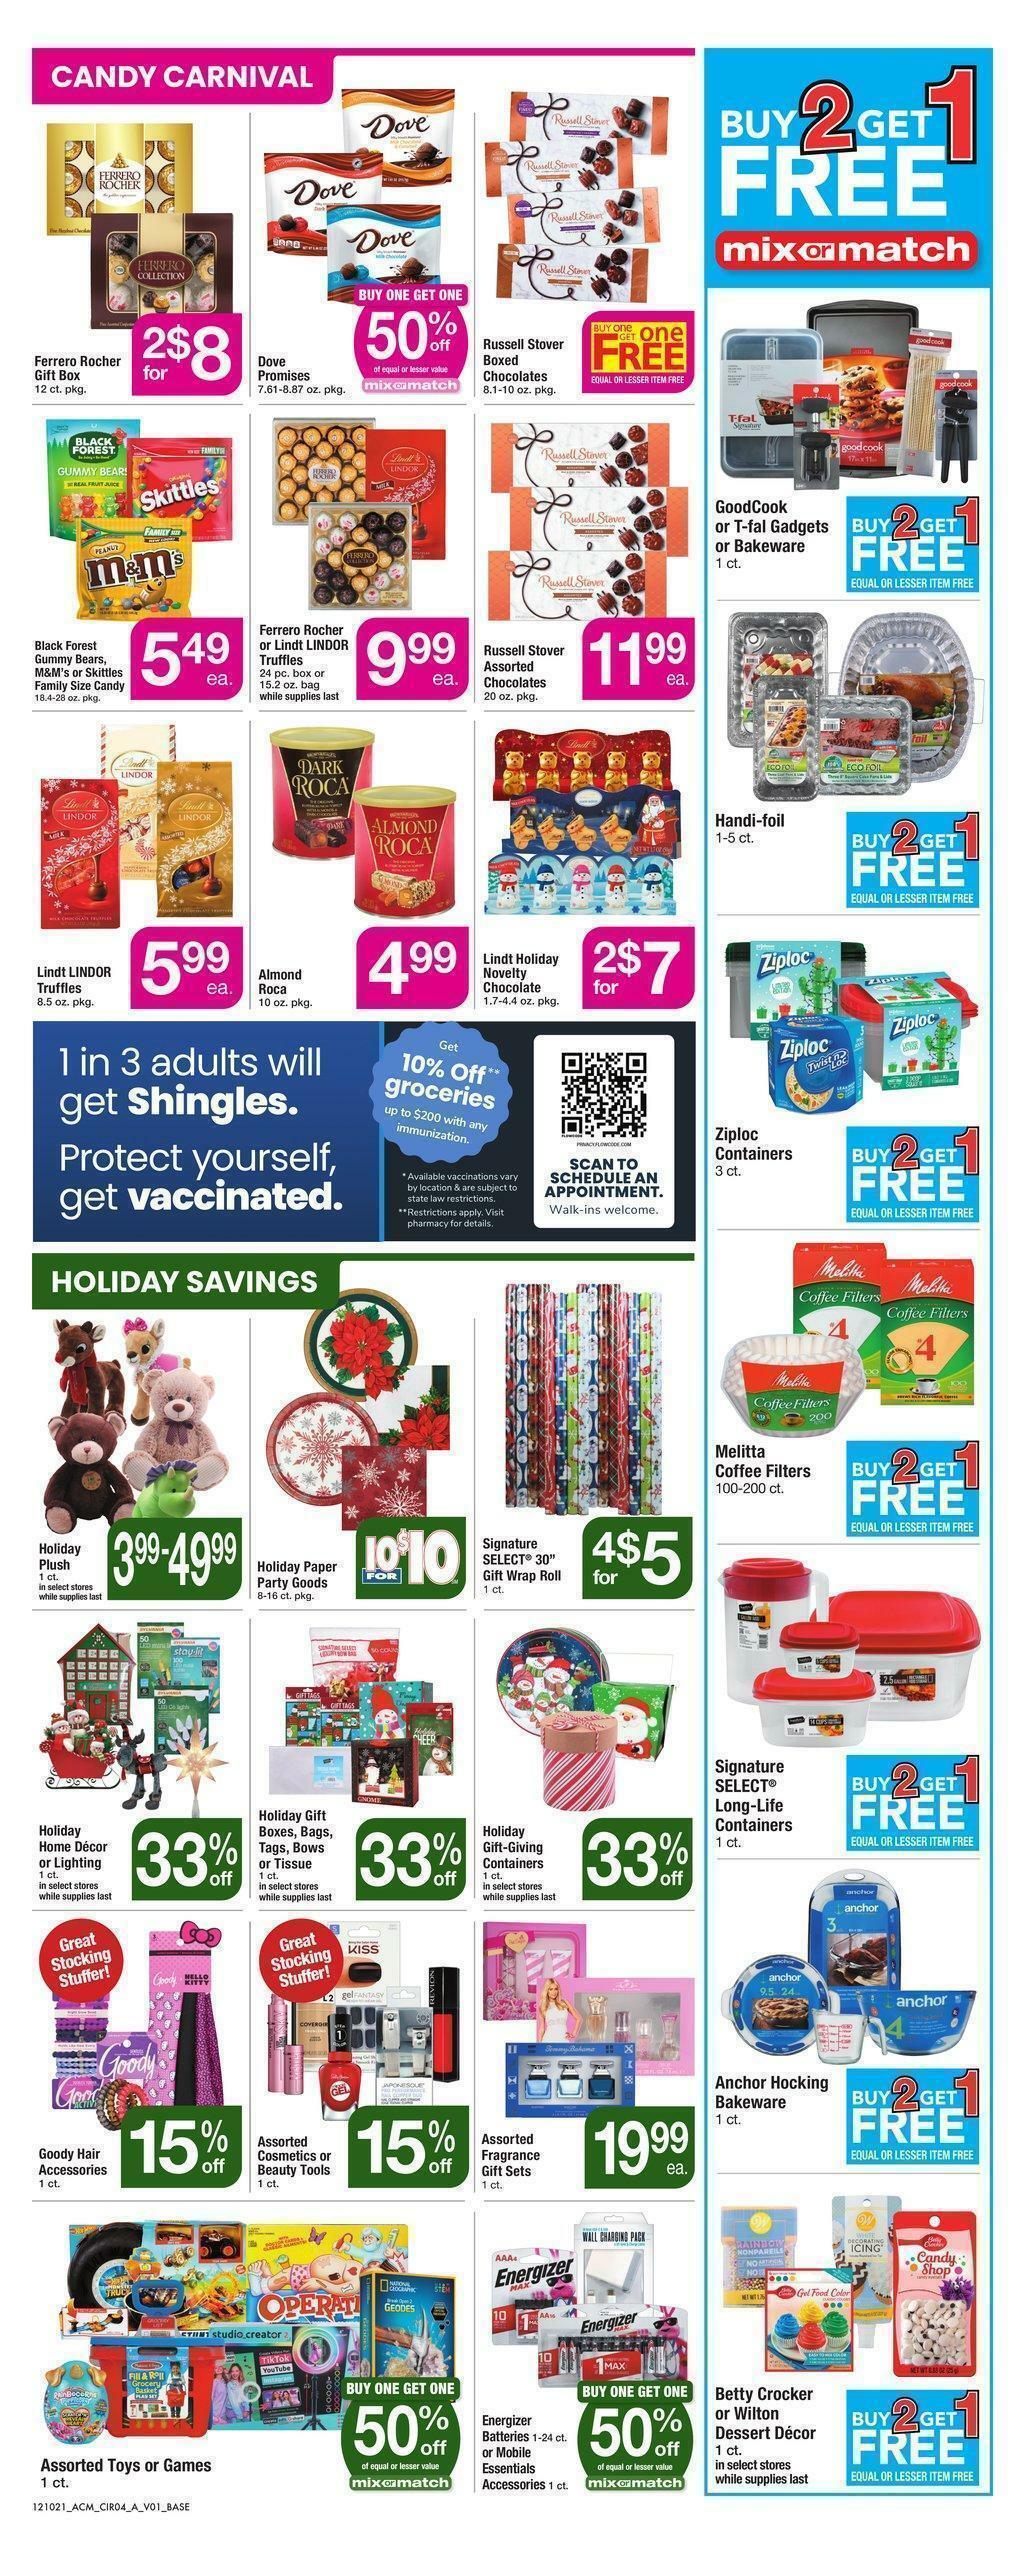 ACME Markets Weekly Ad from December 10